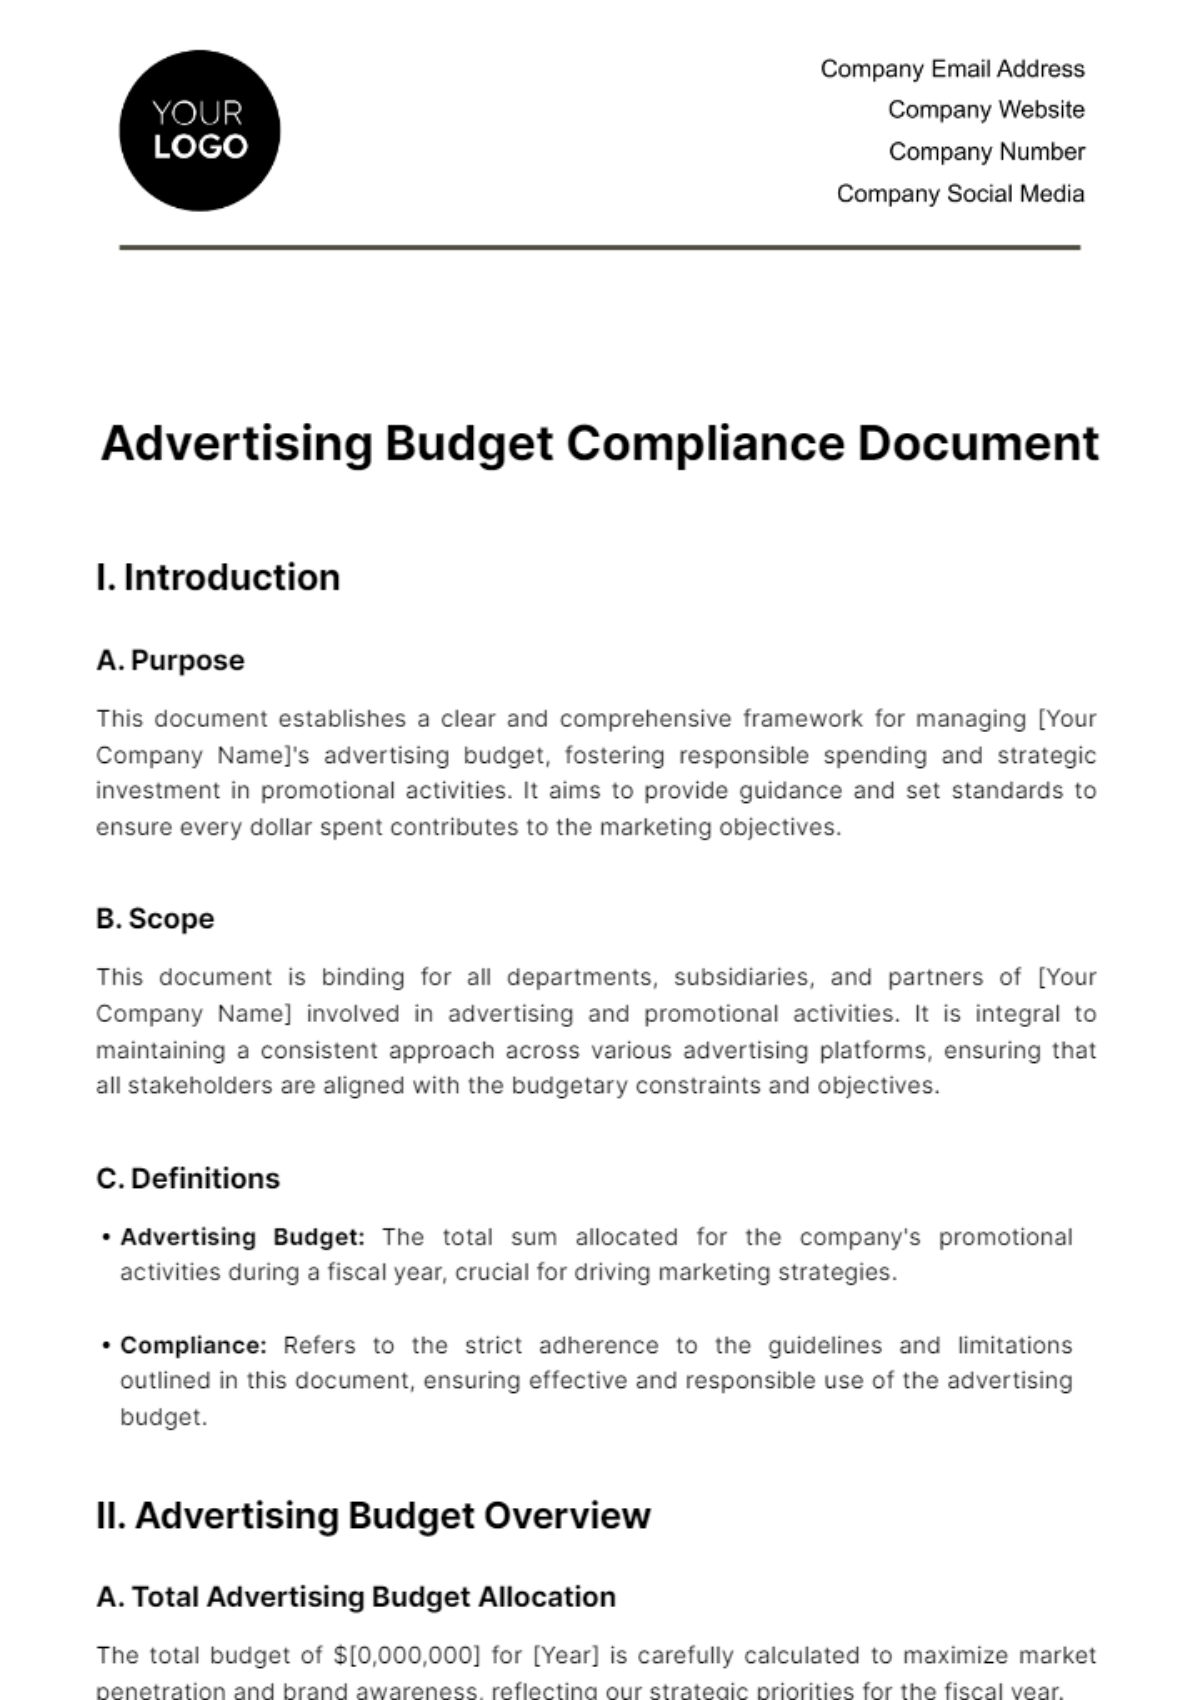 Free Advertising Budget Compliance Document Template